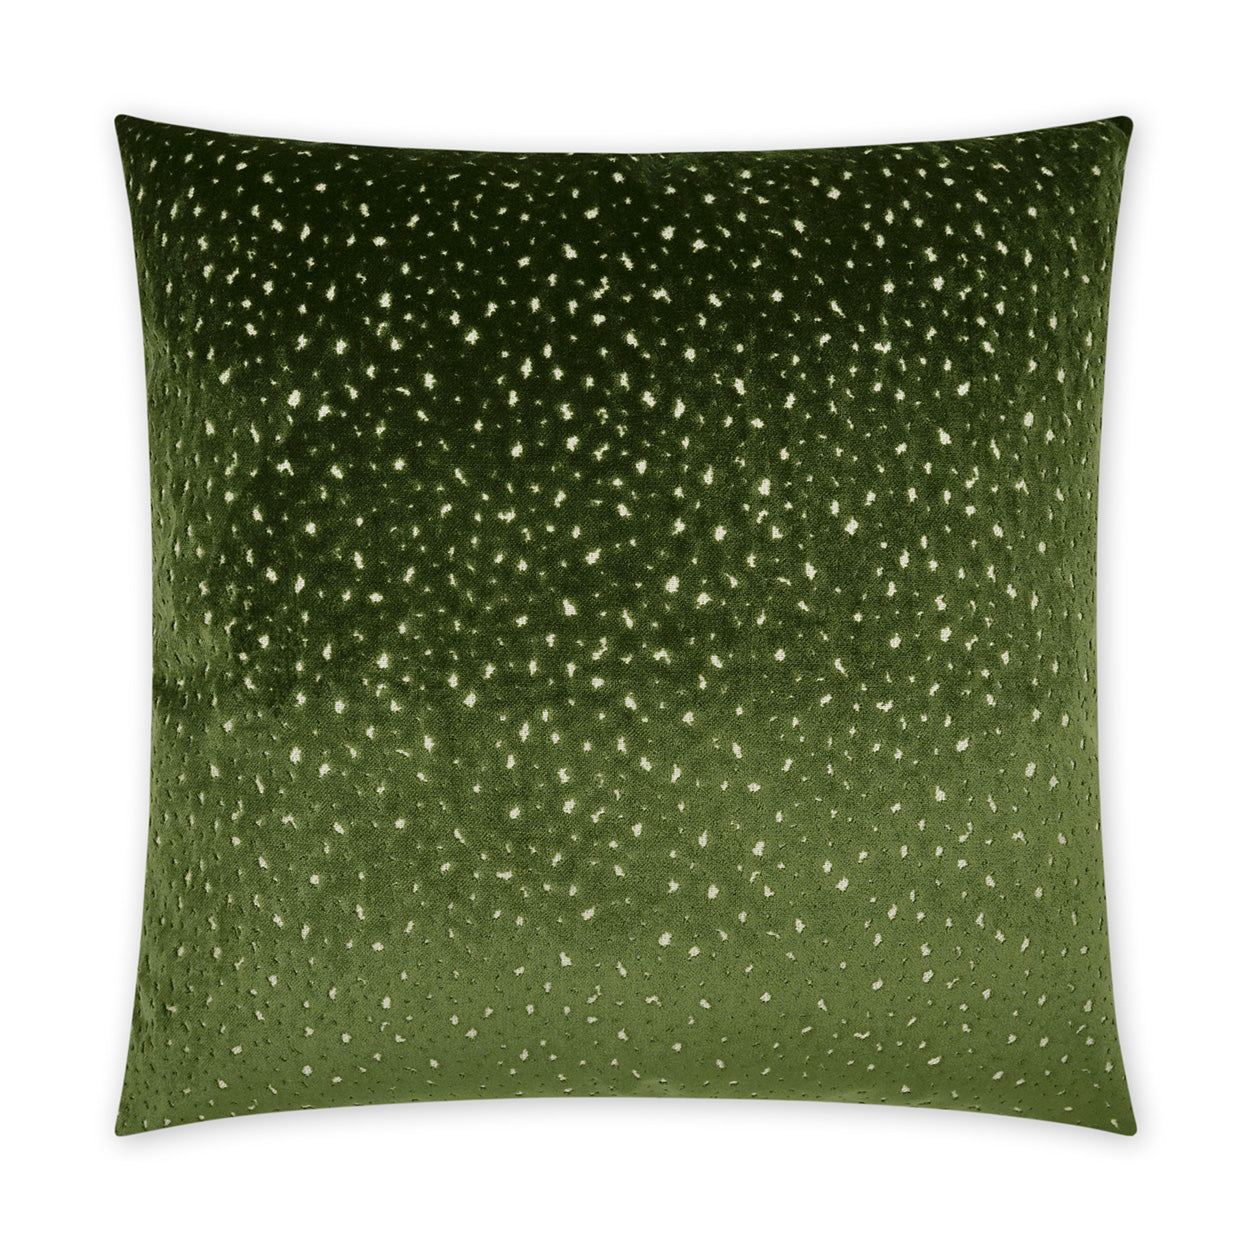 Emory Pillow - Parsley